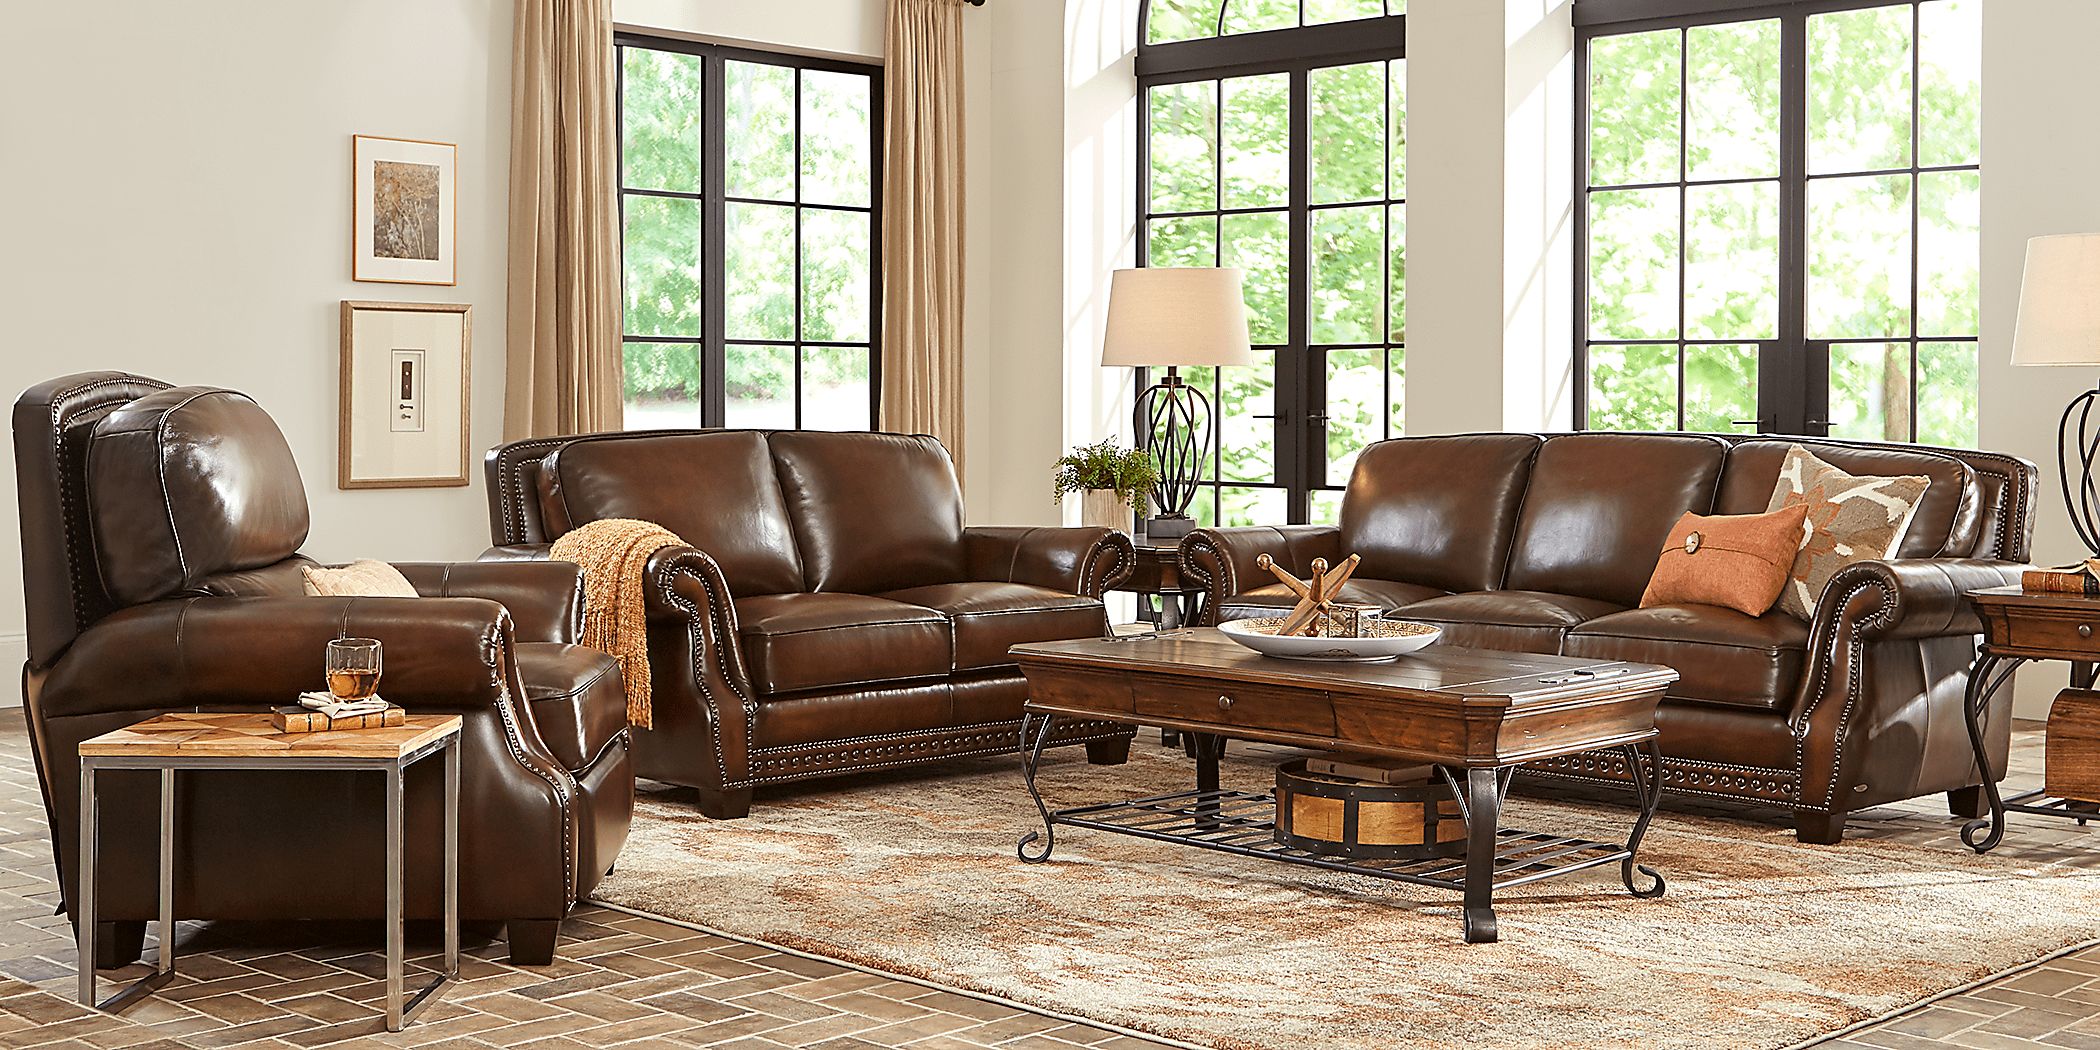 Cindy Crawford Home Calvano Brown Leather 3 Pc Living Room